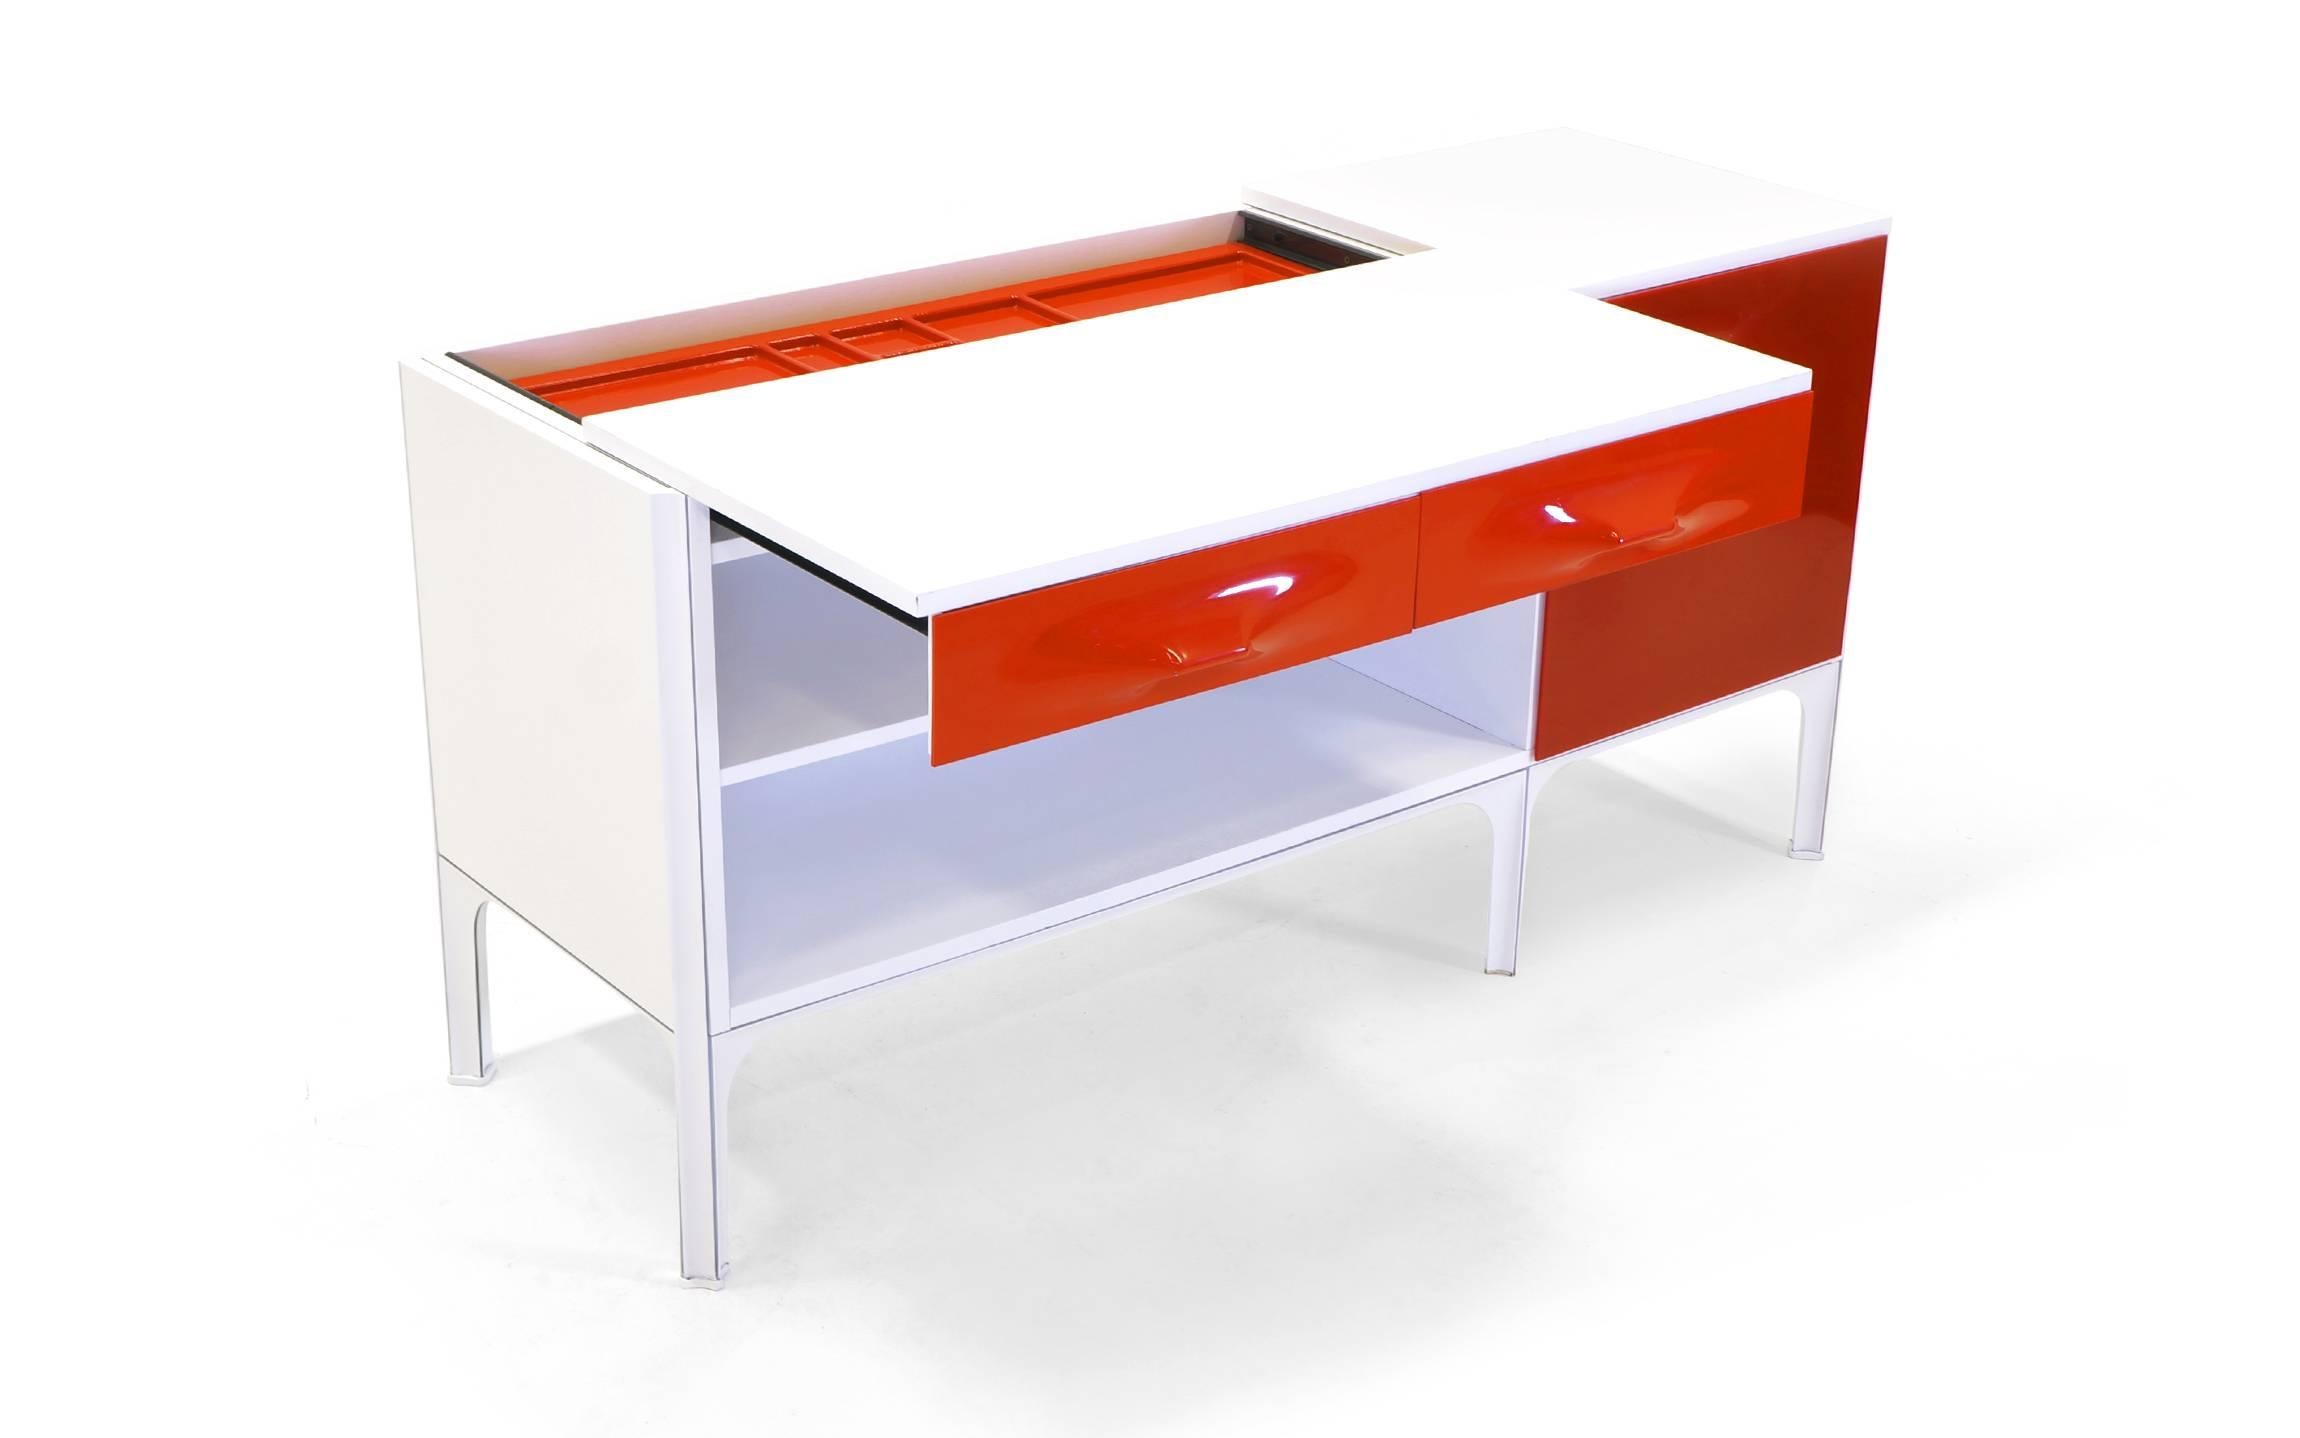 Rare Raymond Loewy DF2000 desk in red, orange, and white. See photos for how the desk top slides forward to create clearance for a chair and also reveals storage. Red molded plastic door reveals three orange lacquered wood drawers. Steel frame.